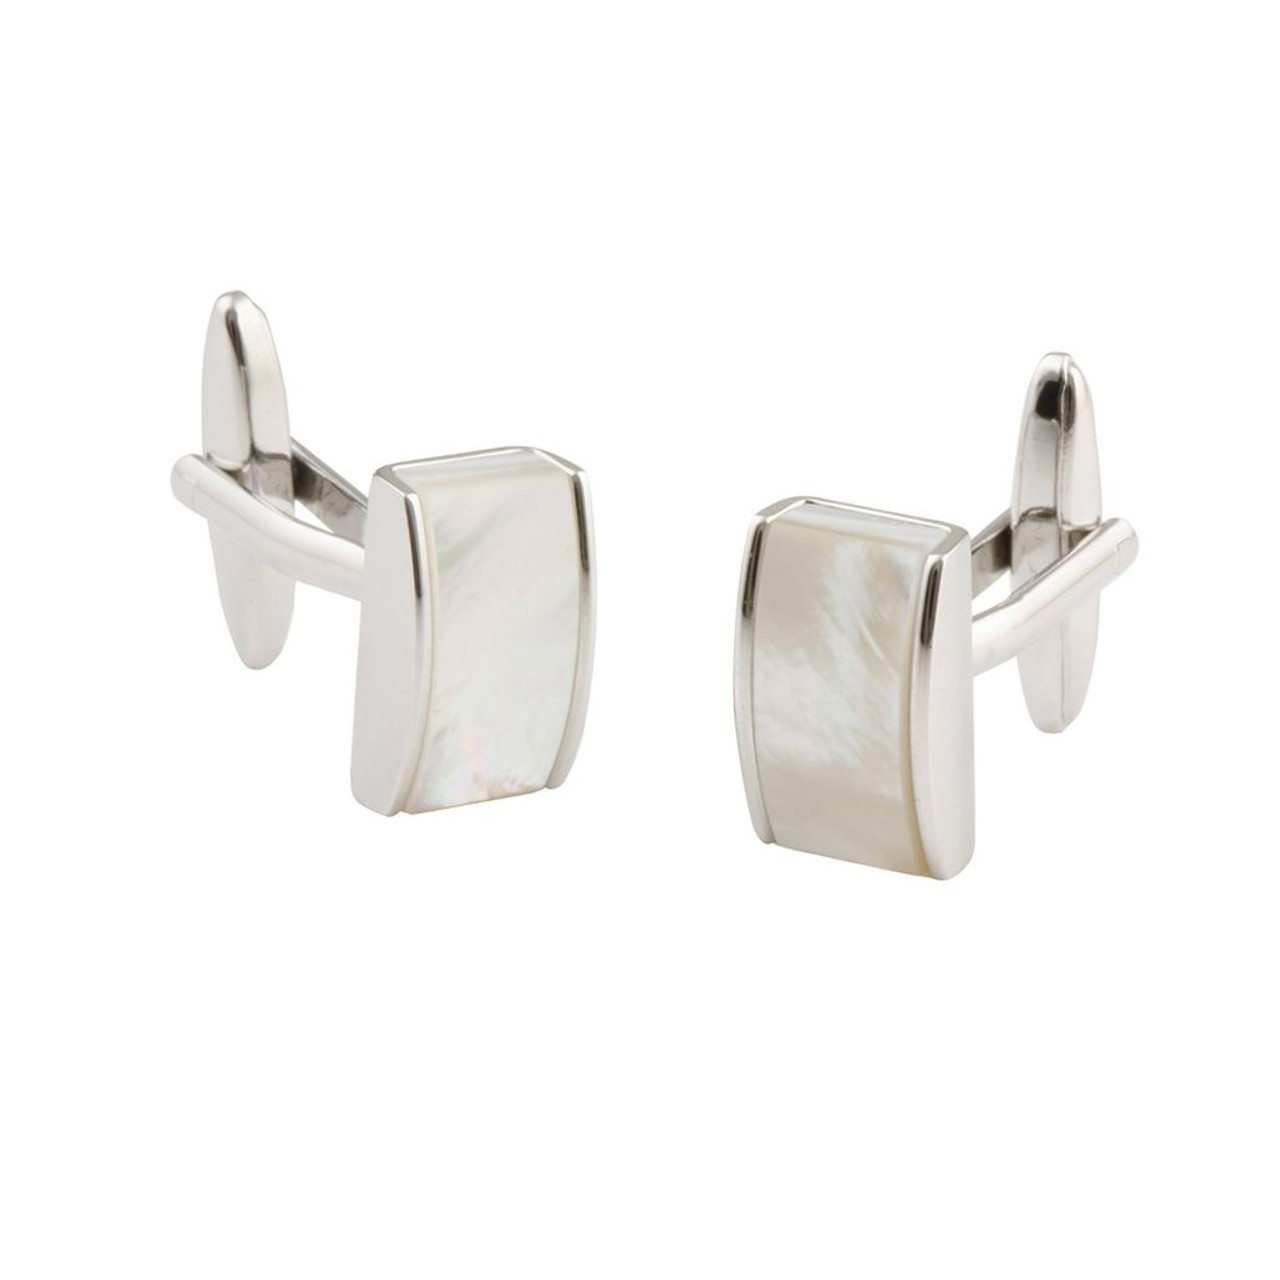 CUFFLINKS. Nickel Polished. Mother of Pearl. Rectangular. Supplied in case.